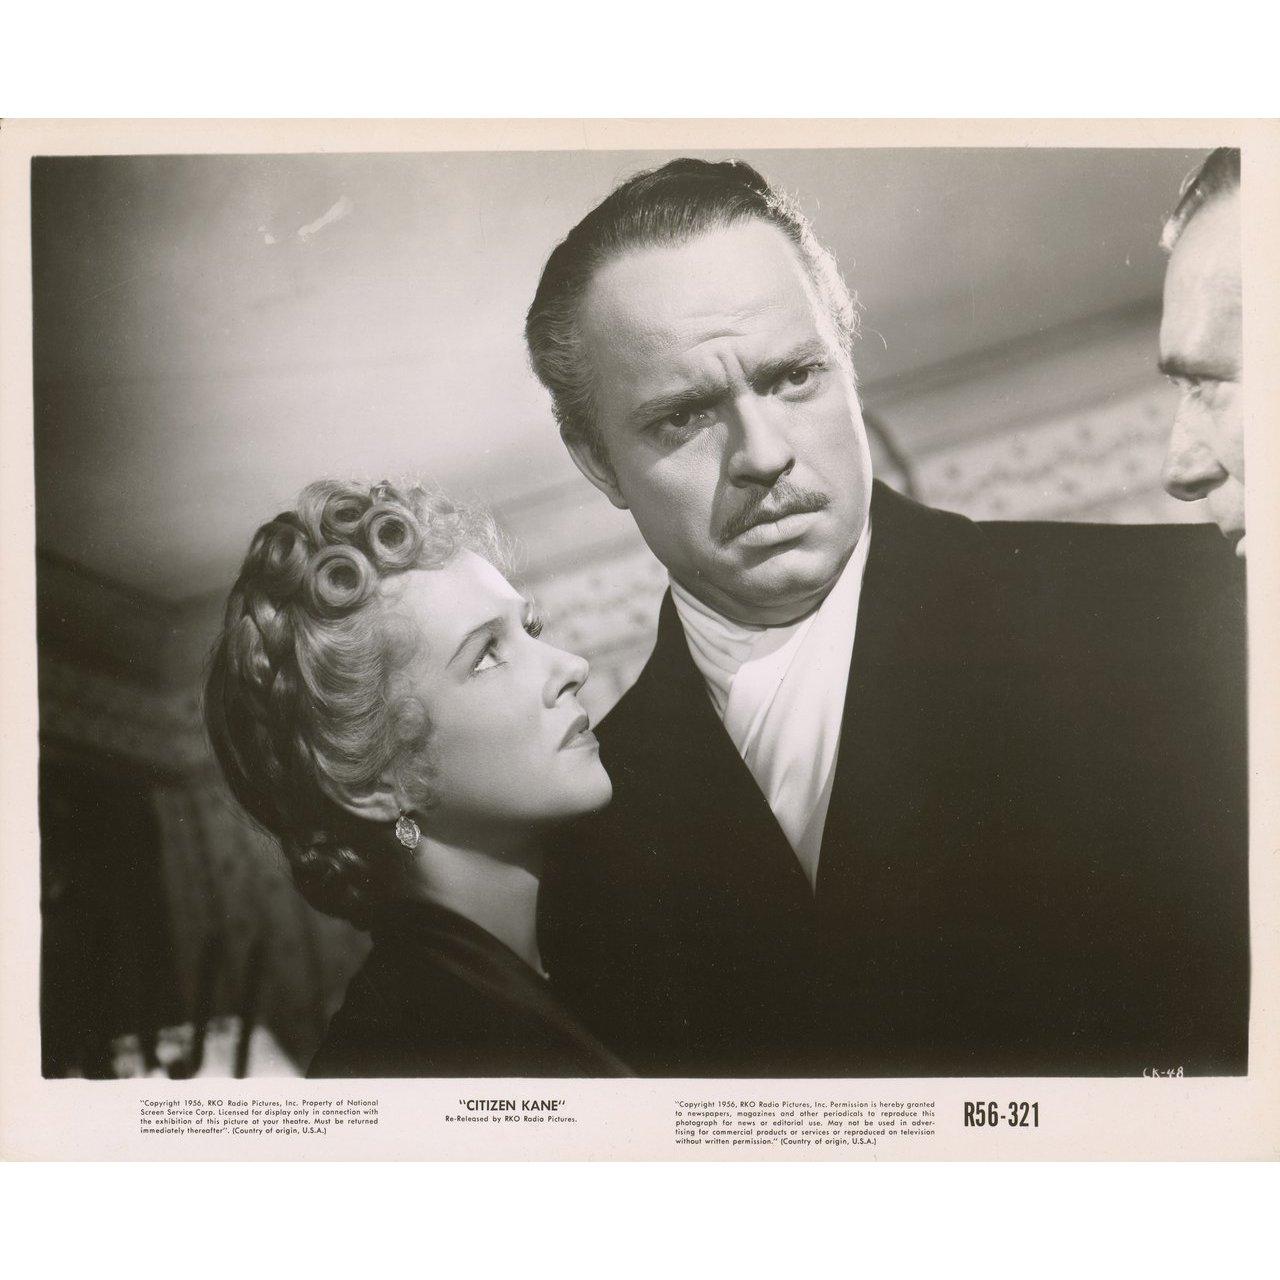 Original 1956 re-release U.S. silver gelatin single-weight photo for the 1941 film Citizen Kane directed by Orson Welles with Joseph Cotten / Dorothy Comingore / Agnes Moorehead / Ruth Warrick. Very Good-Fine condition. Please note: the size is